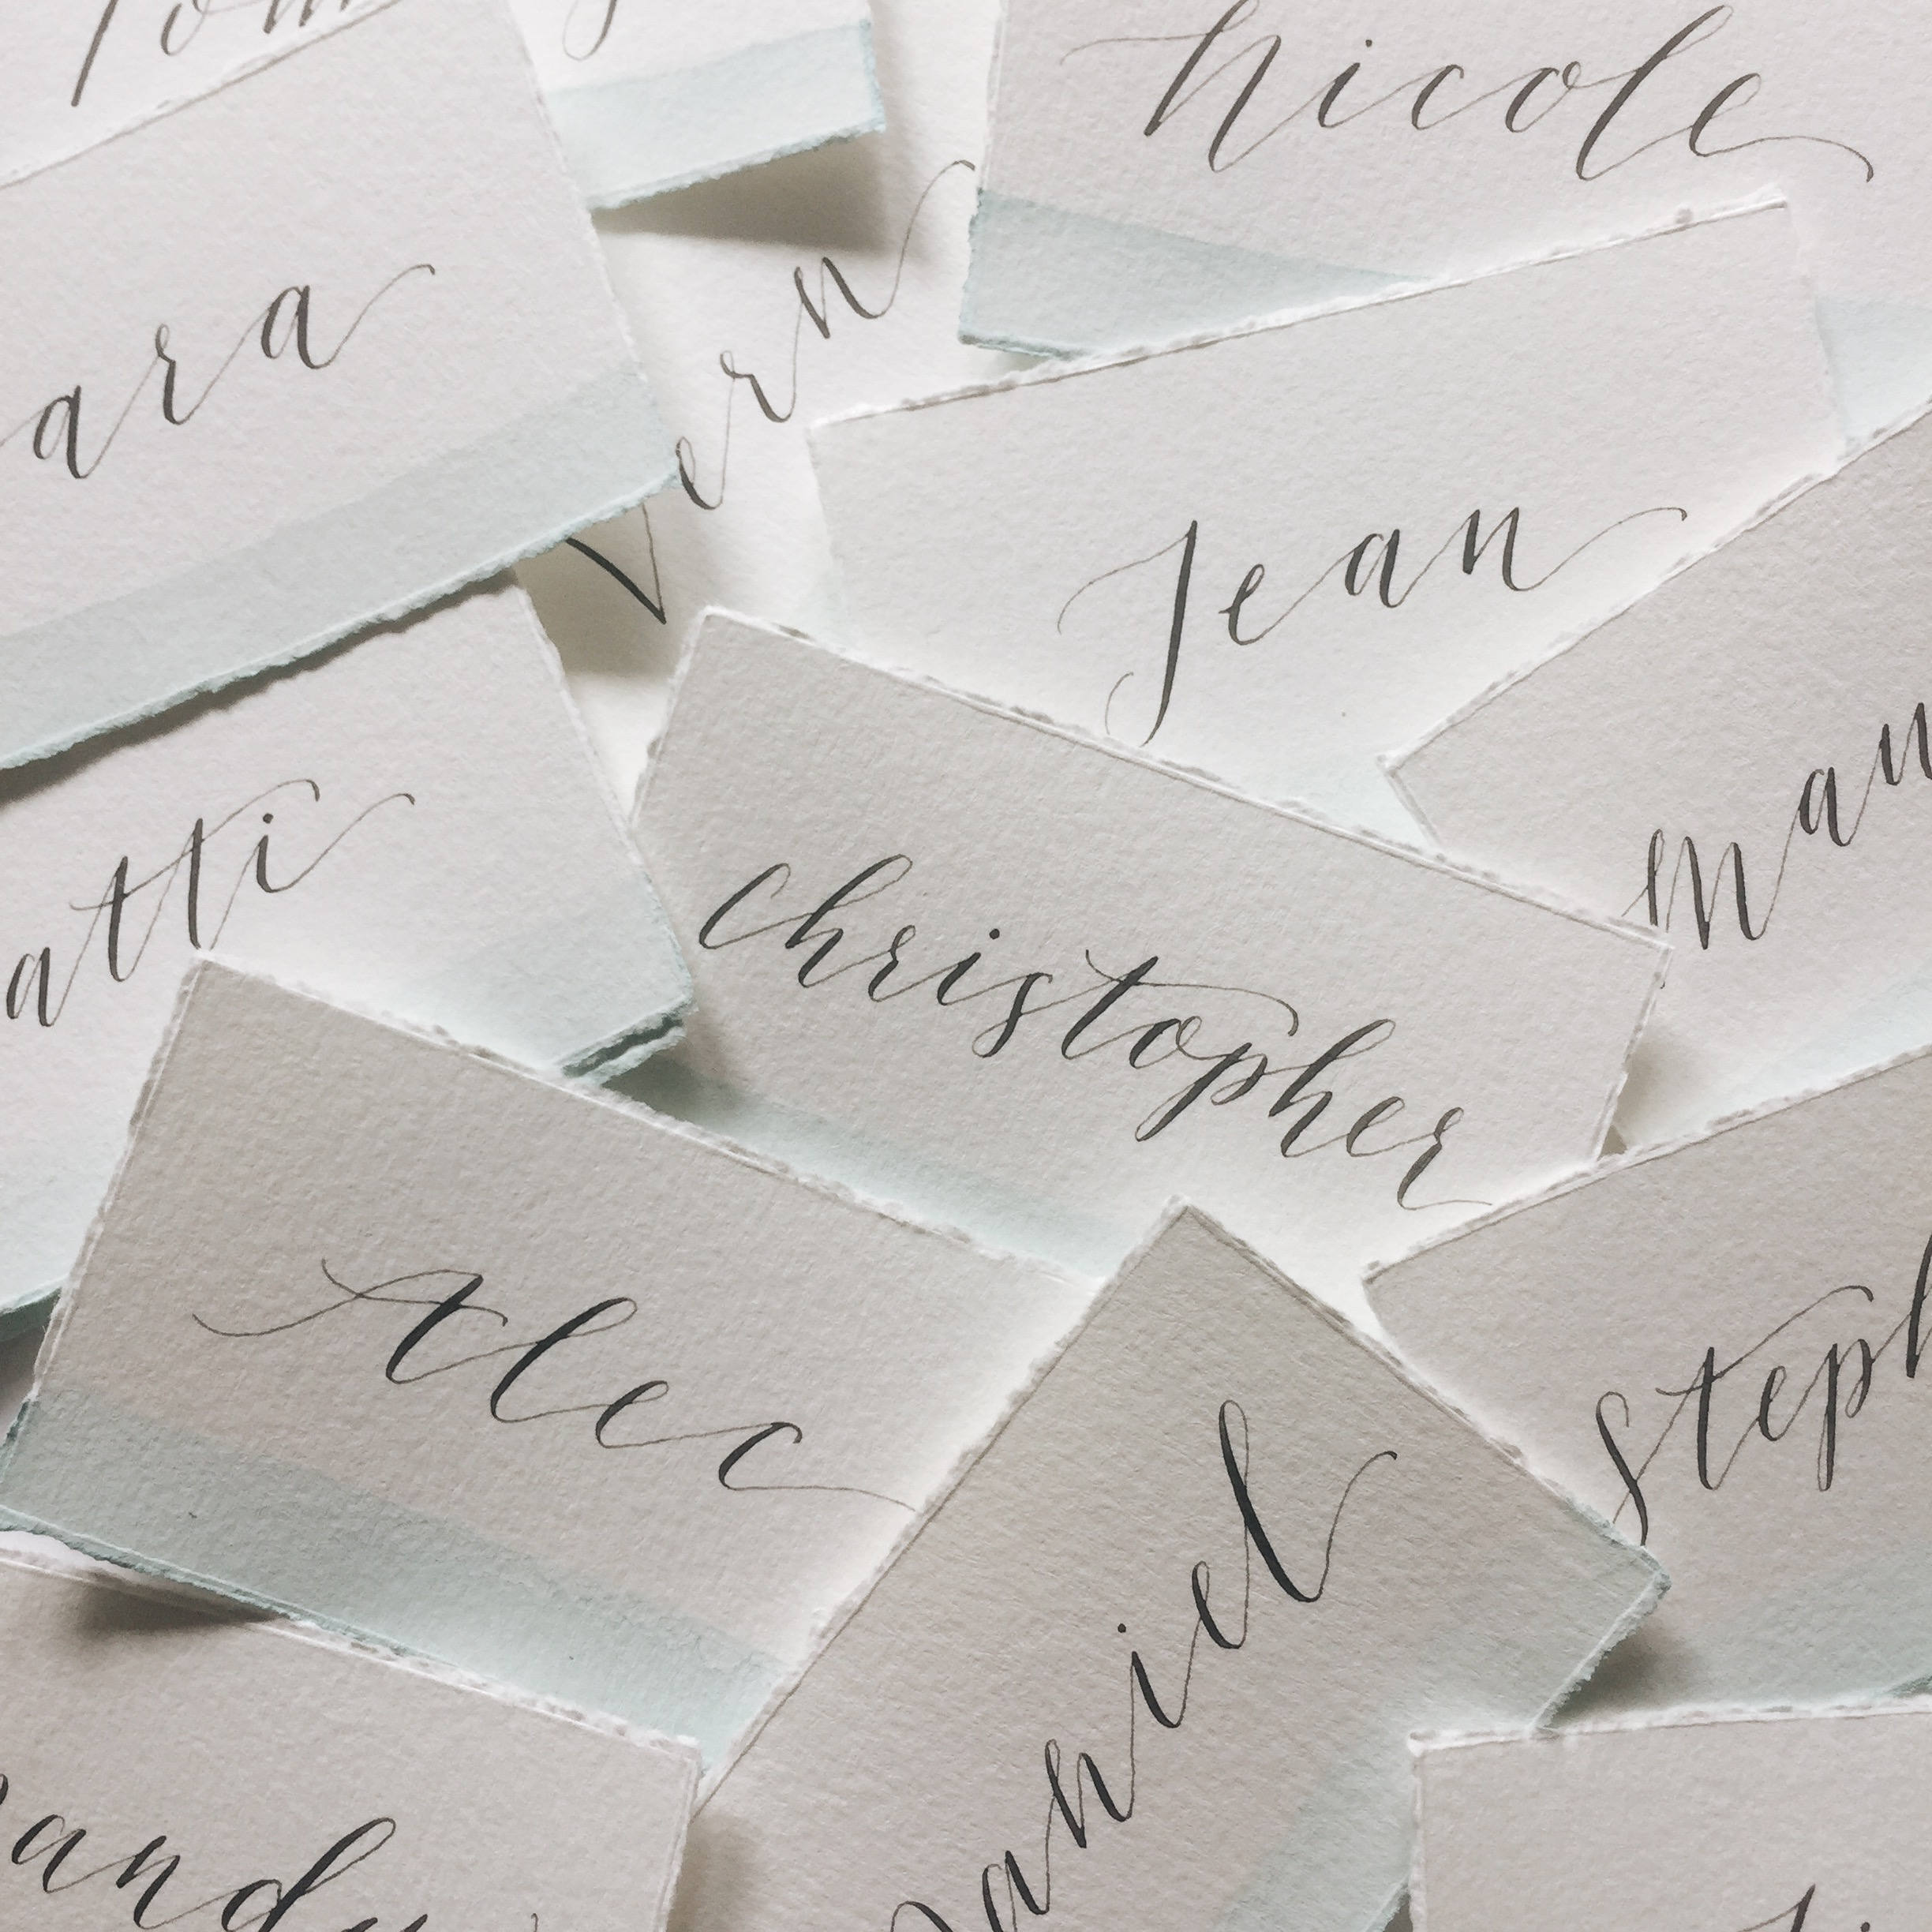 via How to Get the Most Beautiful Calligraphy Envelopes | http://bit.ly/2L93BbT